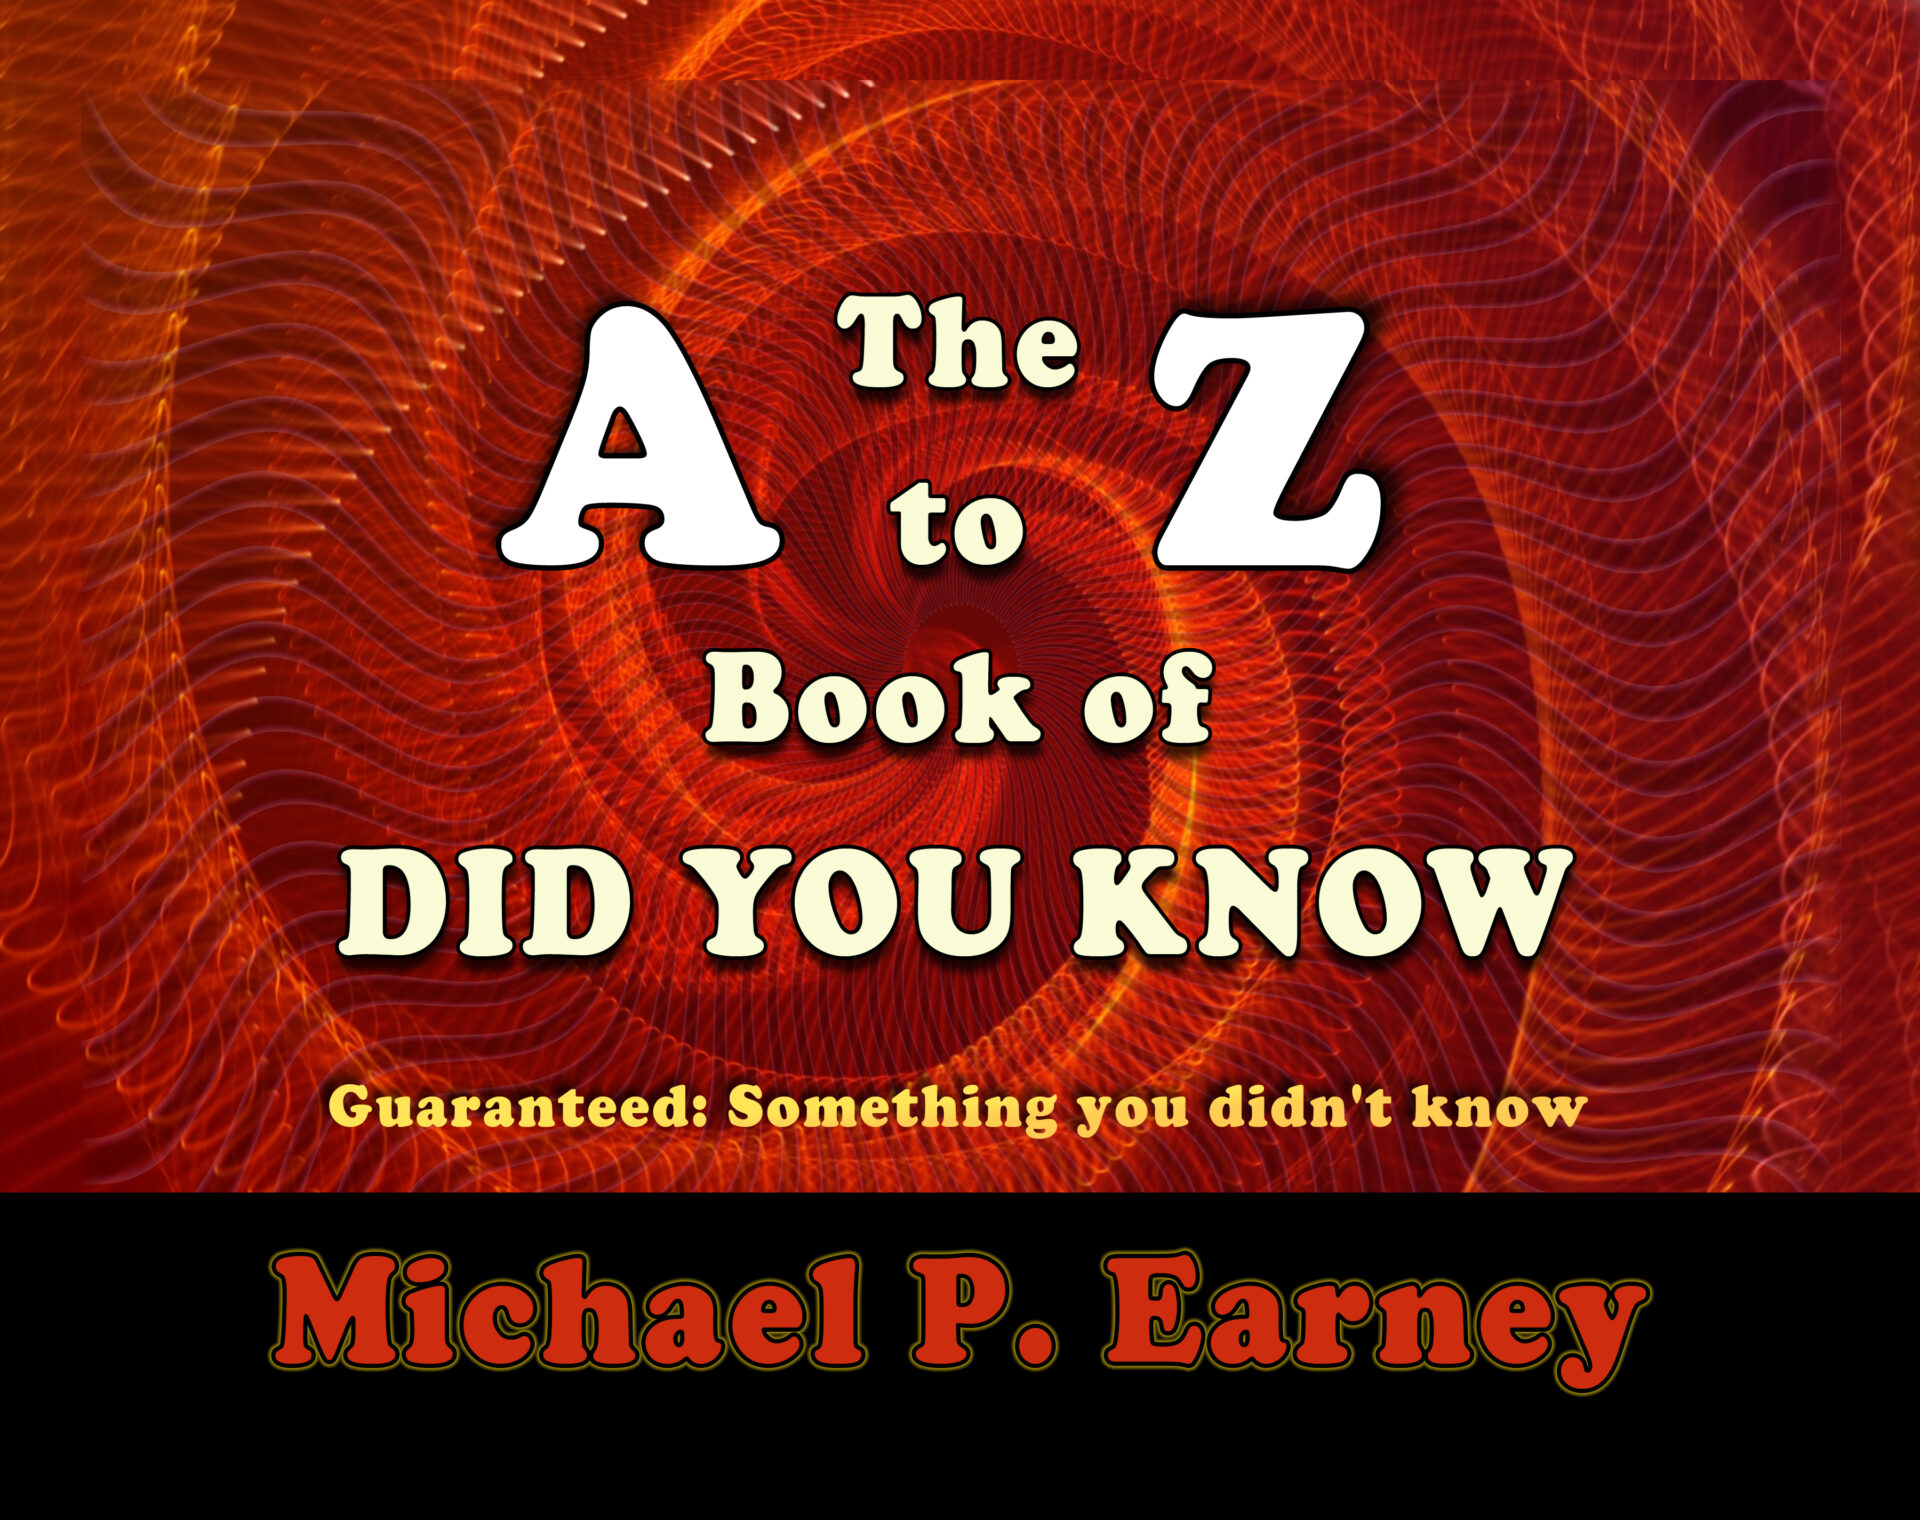 The A to Z of Did You Know by author Michael P. Earney